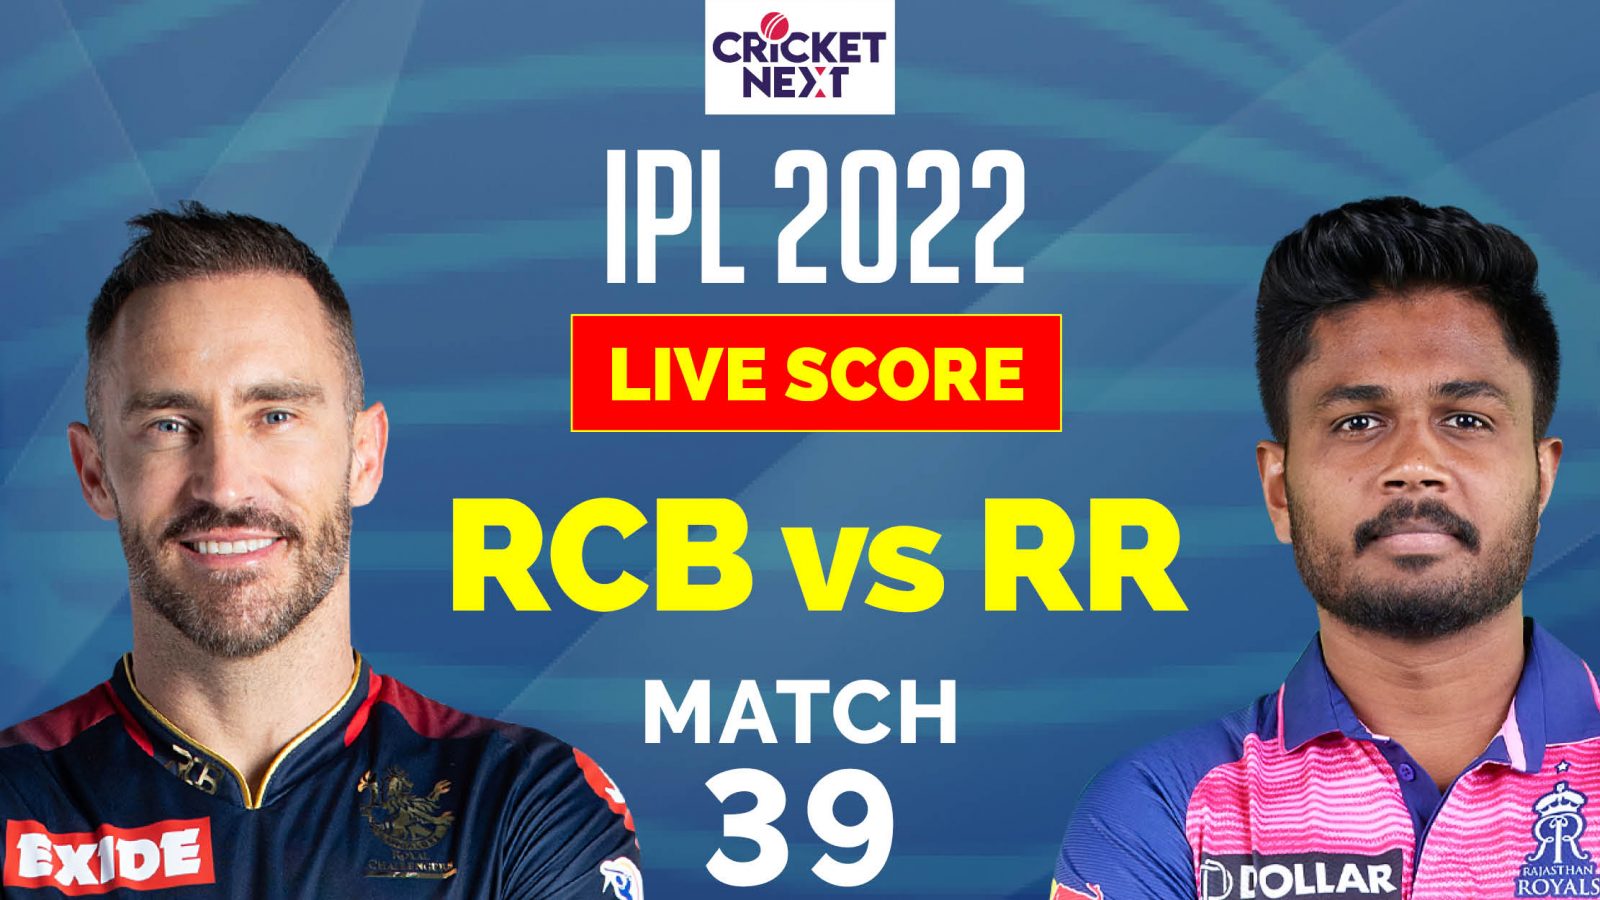 Rajasthan Royals hilariously troll RCB for using their incorrect logo